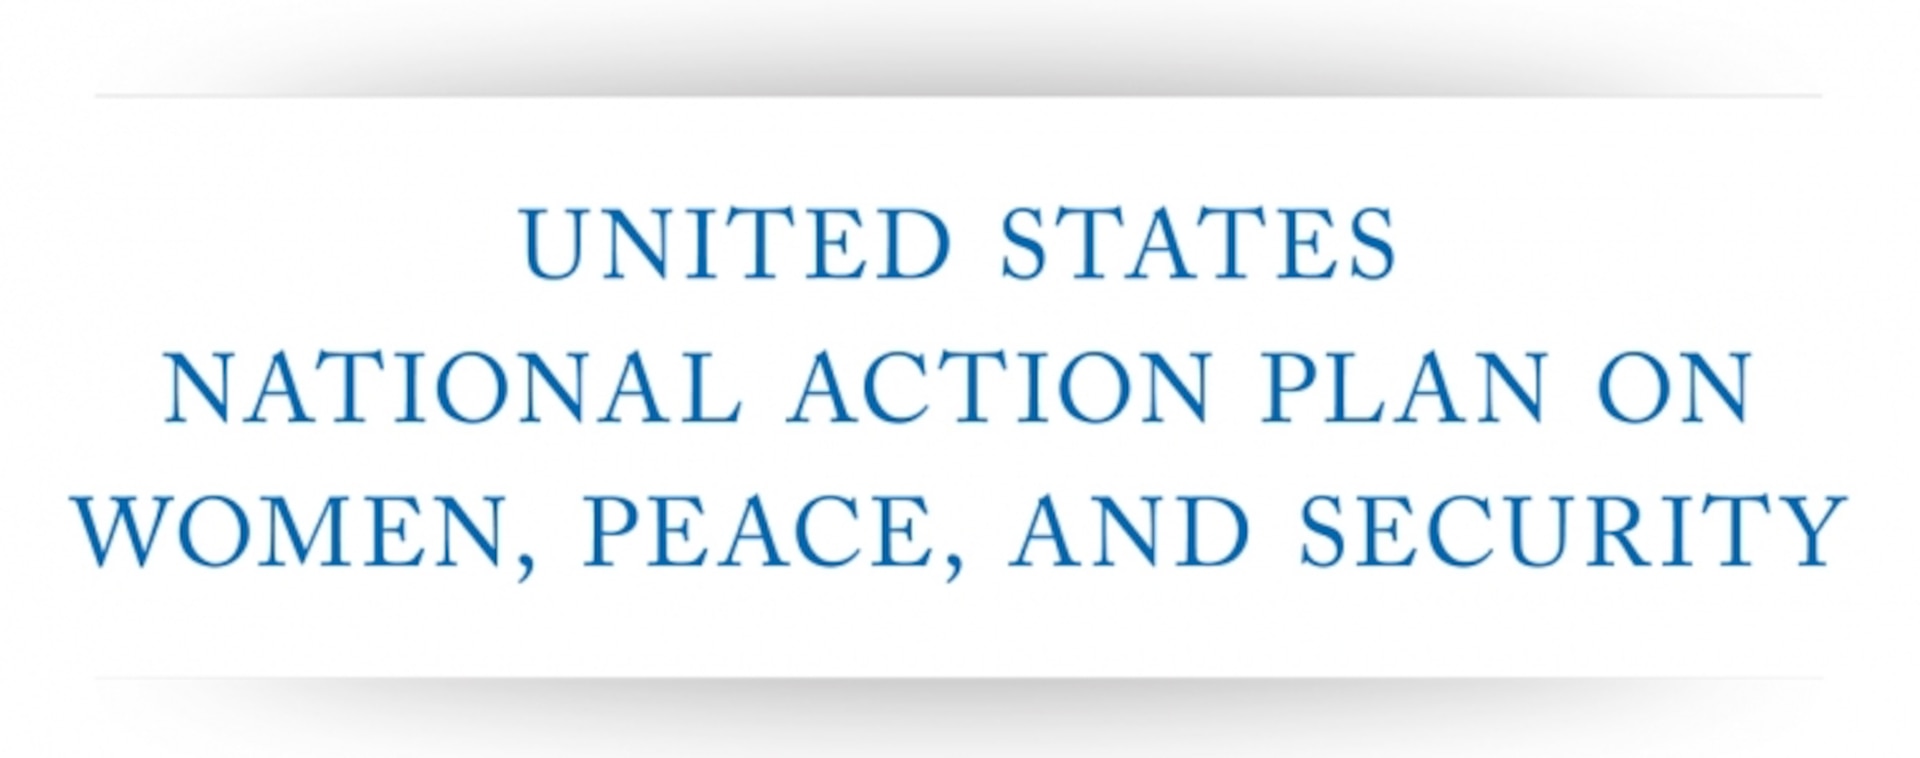 United States National Action Plan on Women, Peace, and Security